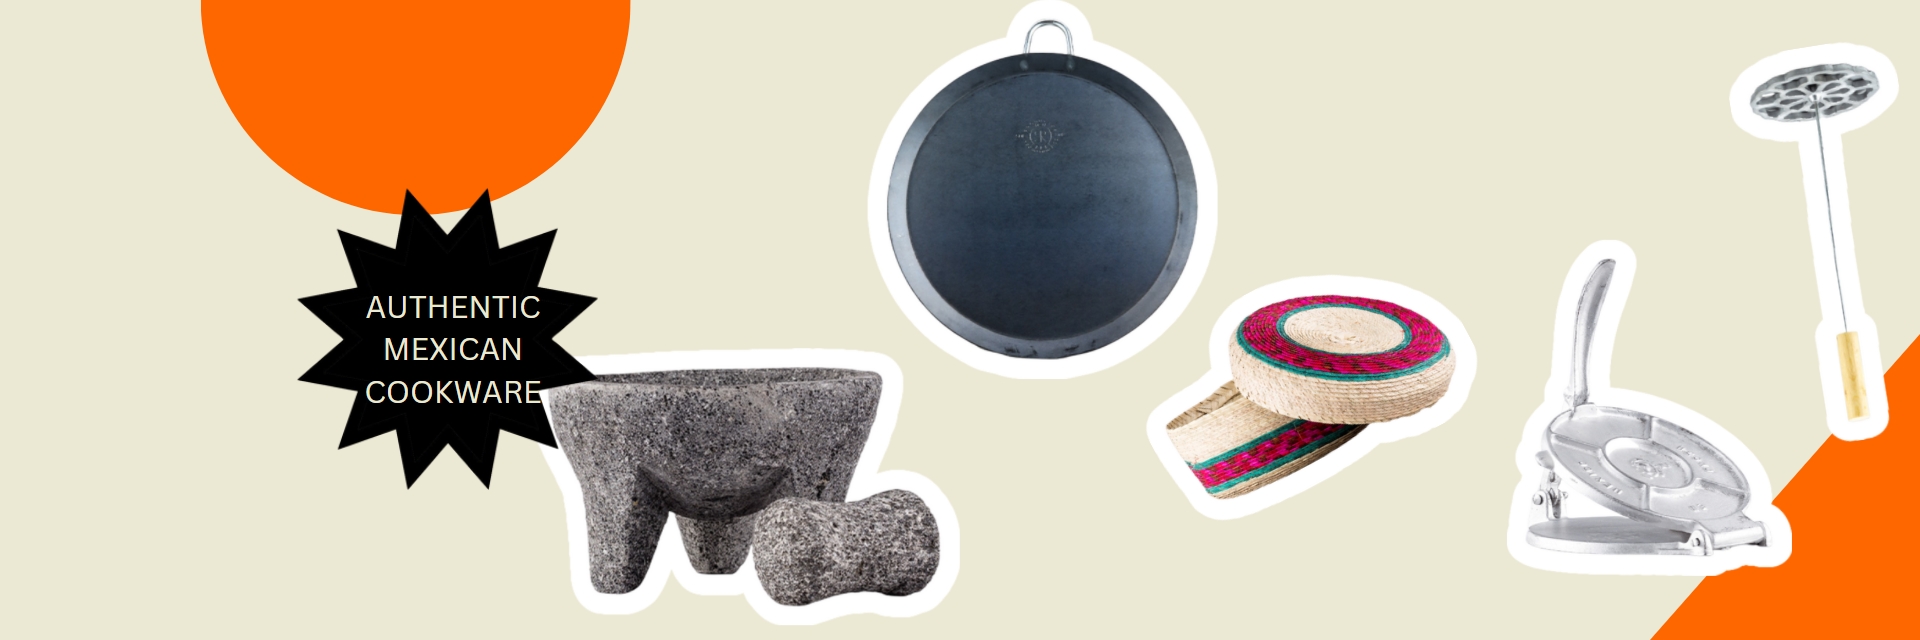 Mexican Cookware & Cookbooks - banner image